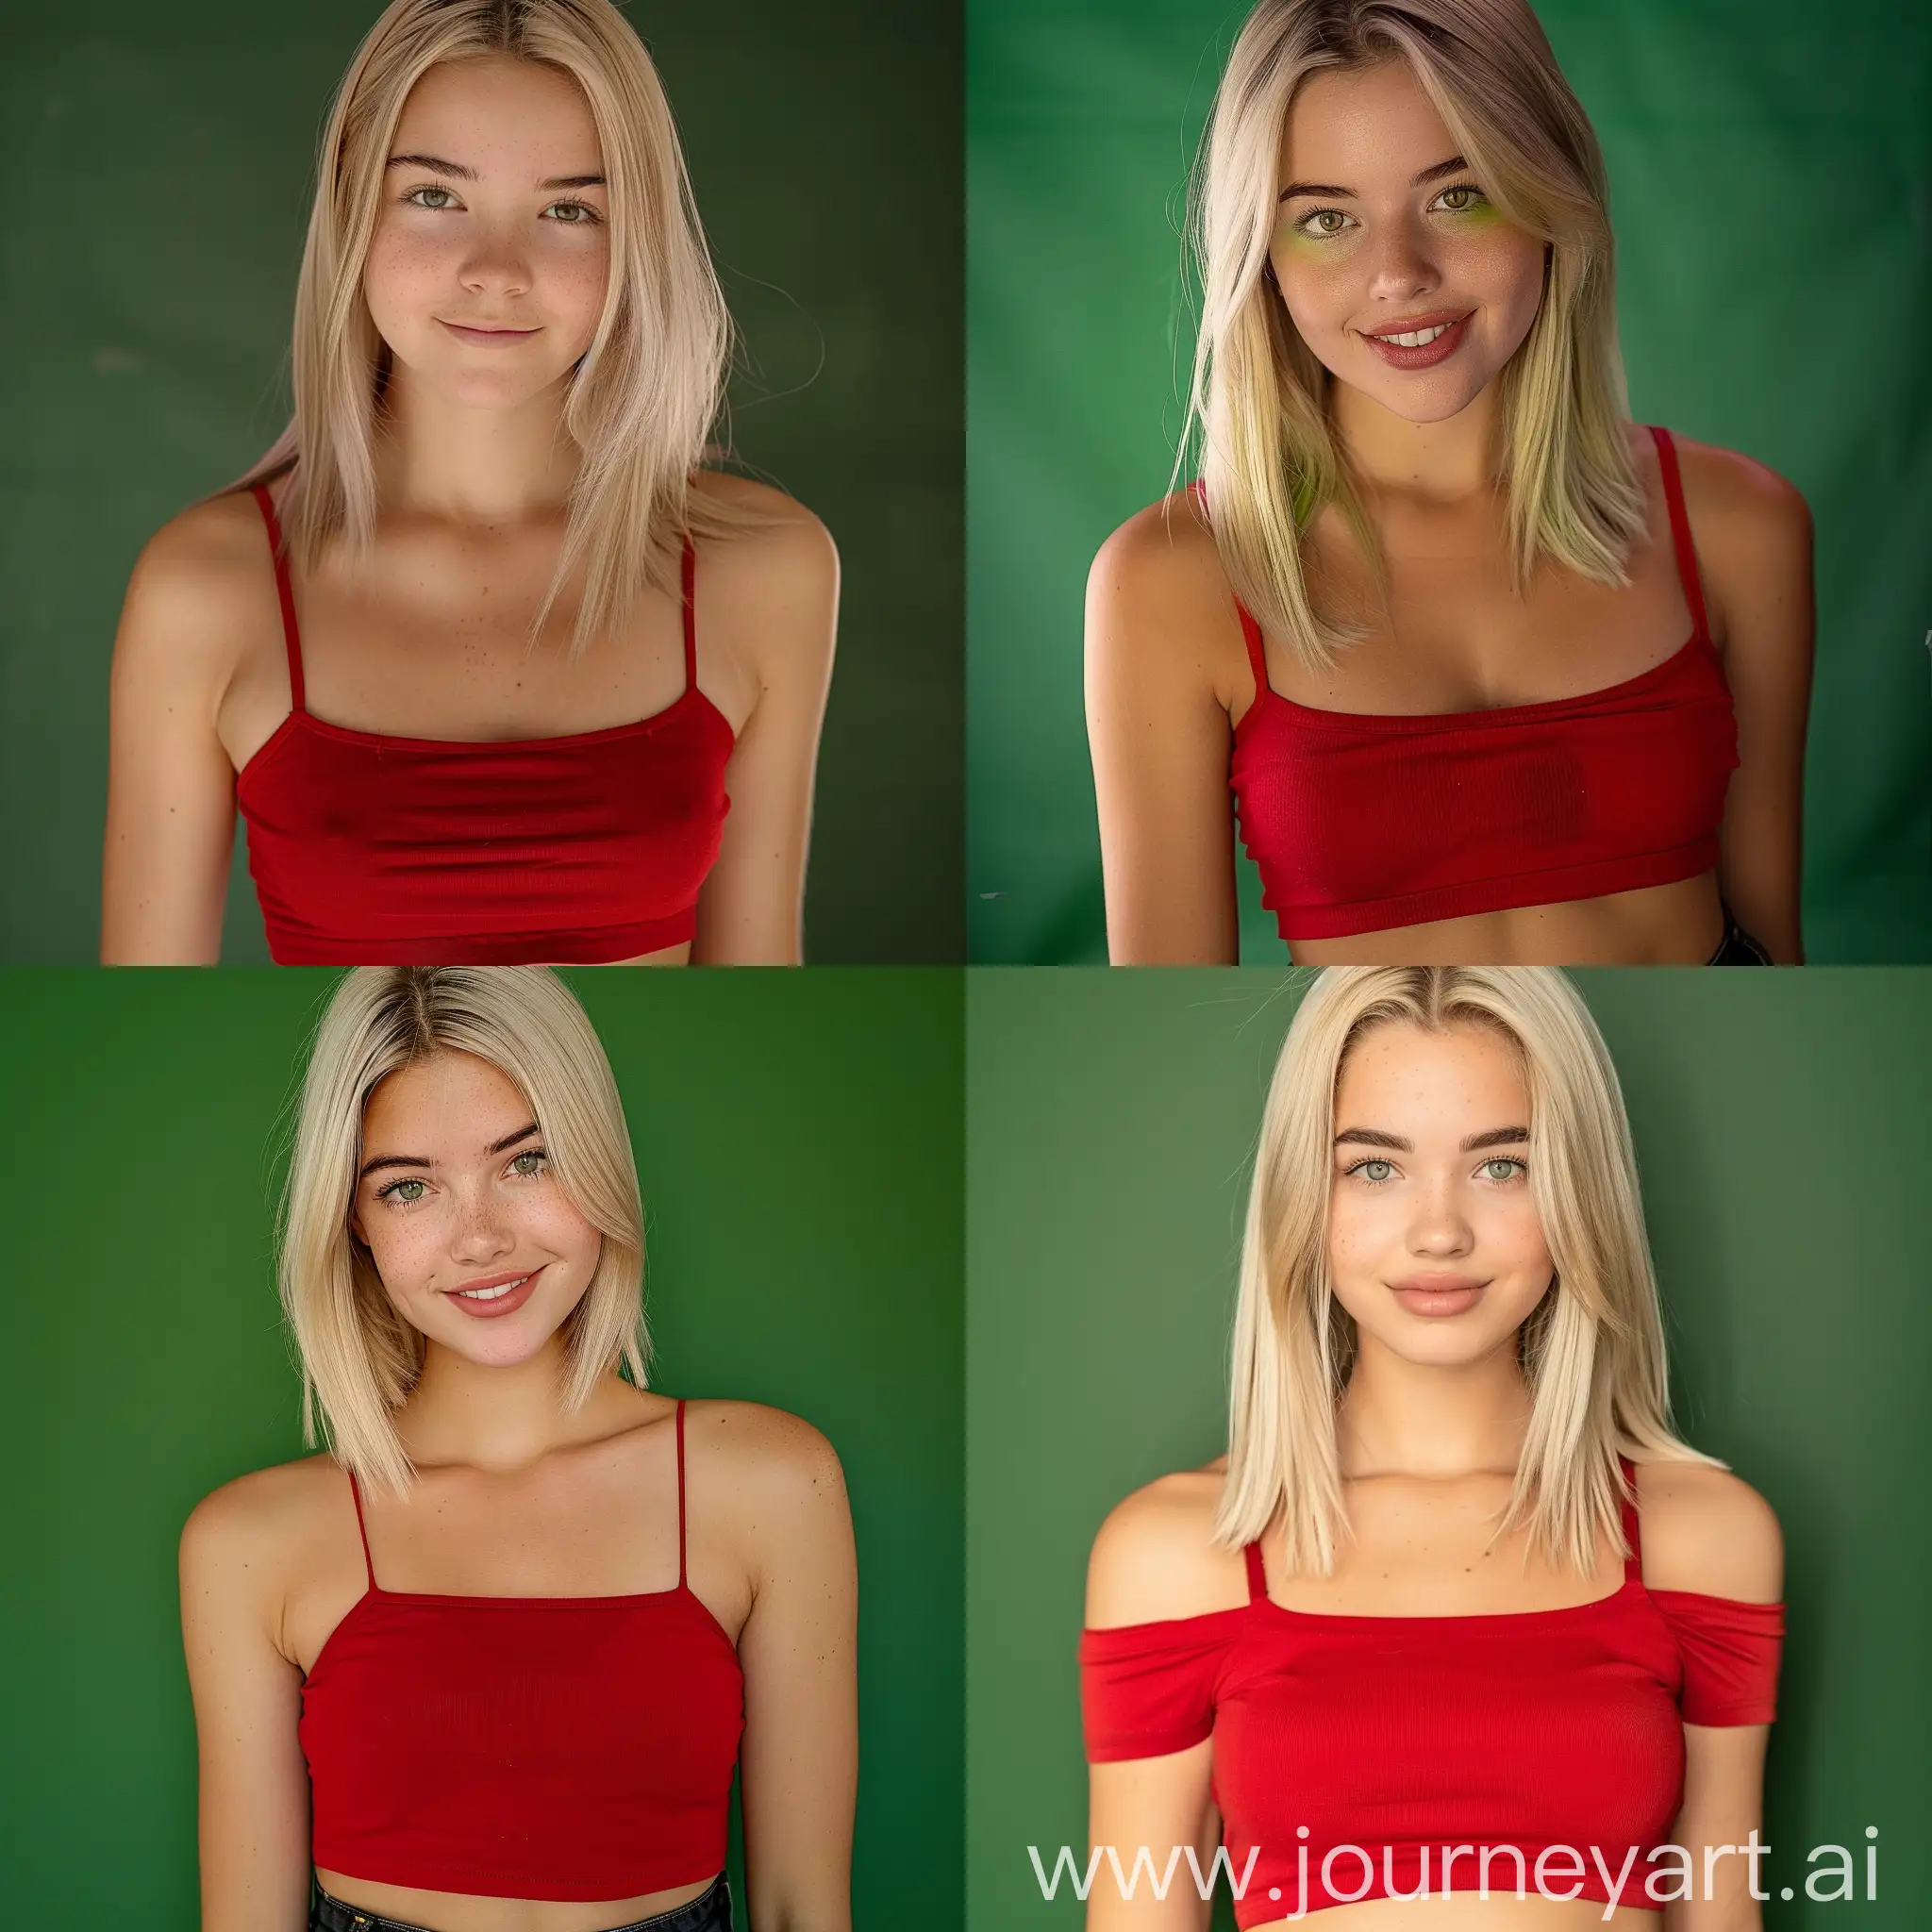 feminine face, age 19, moderately thick eyebrows, slim body, blonde straight hair with blonde highlights, inocent face, sharp jaw line, head only, silky smooth skin, vibrant glowing eyes, endearing smile, background as a greenscreen, full body in picture, with a red croptop, add black jeans